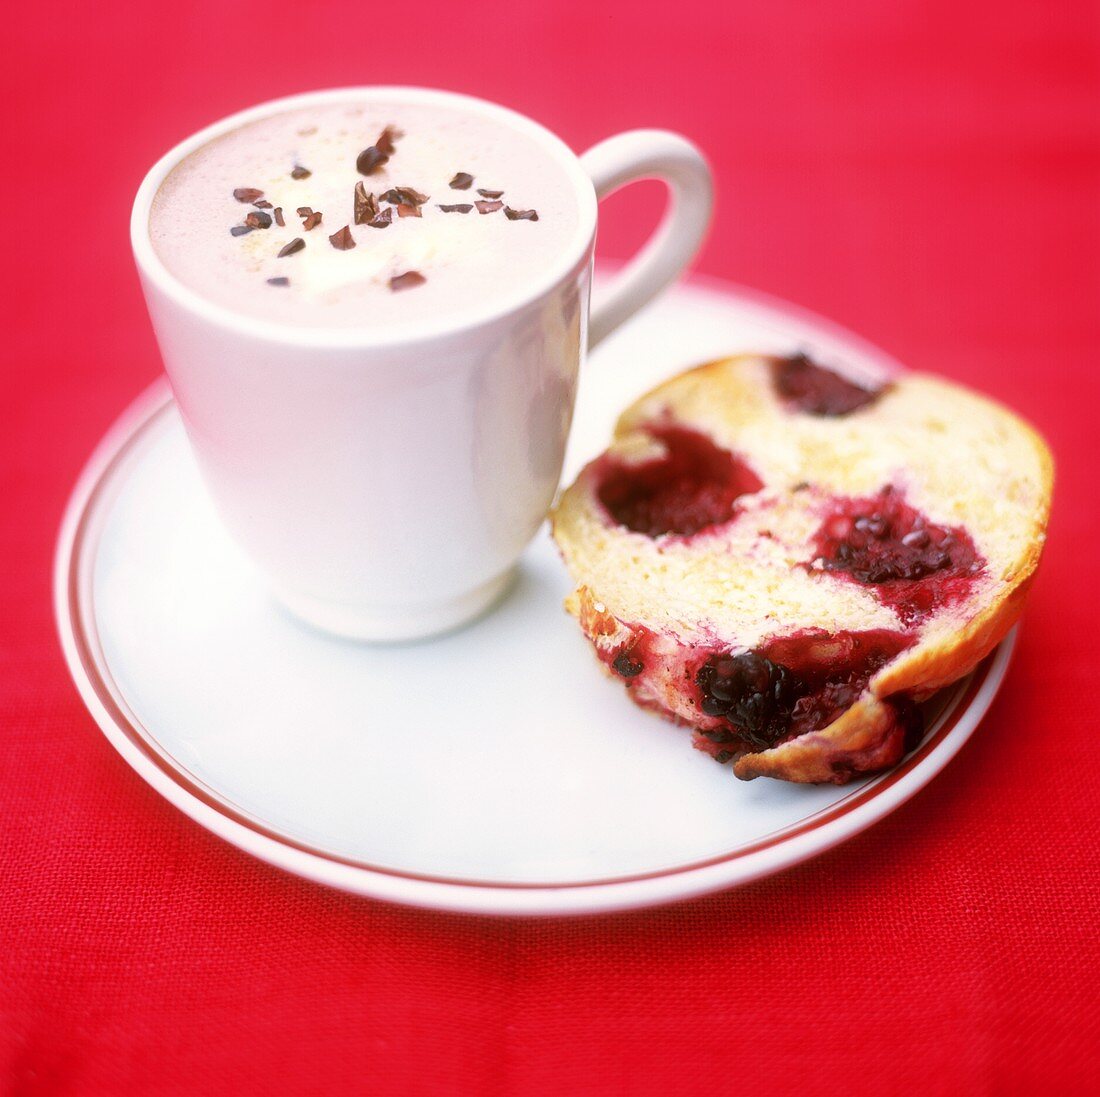 Hot chocolate and blackberry scone